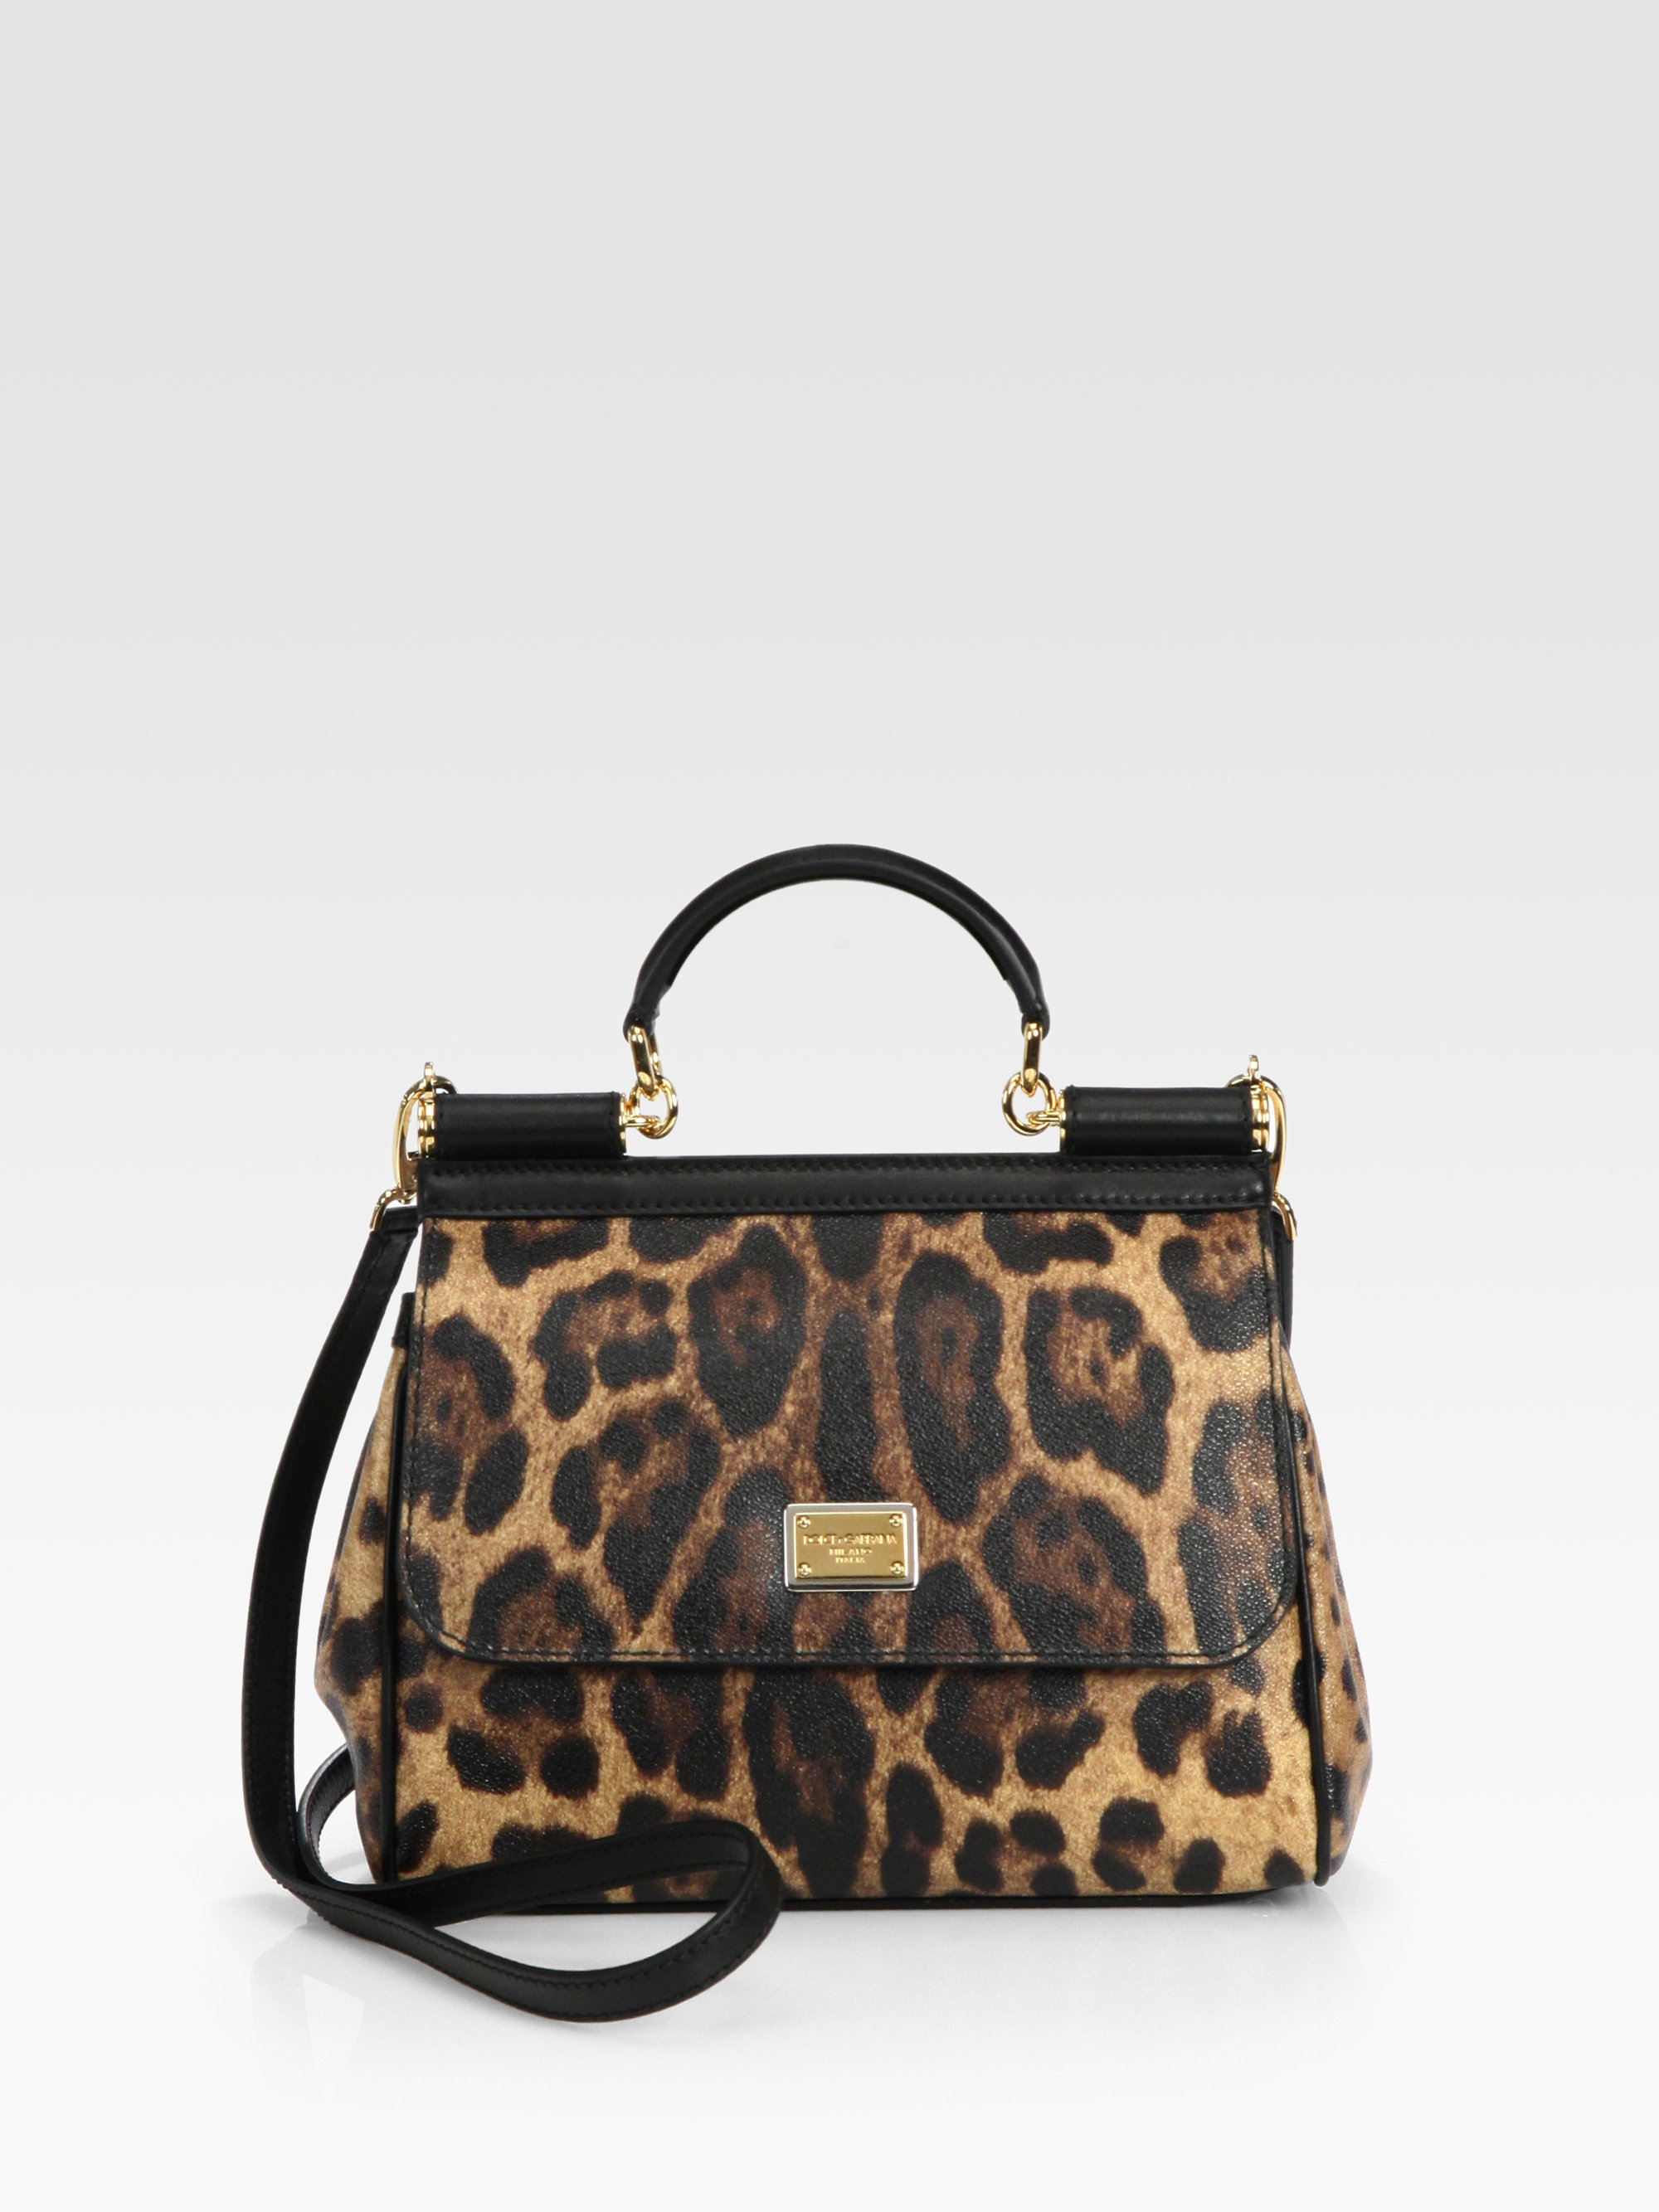 Lyst - Dolce & Gabbana Sicily Leopard Printed Coated Canvas Satchel